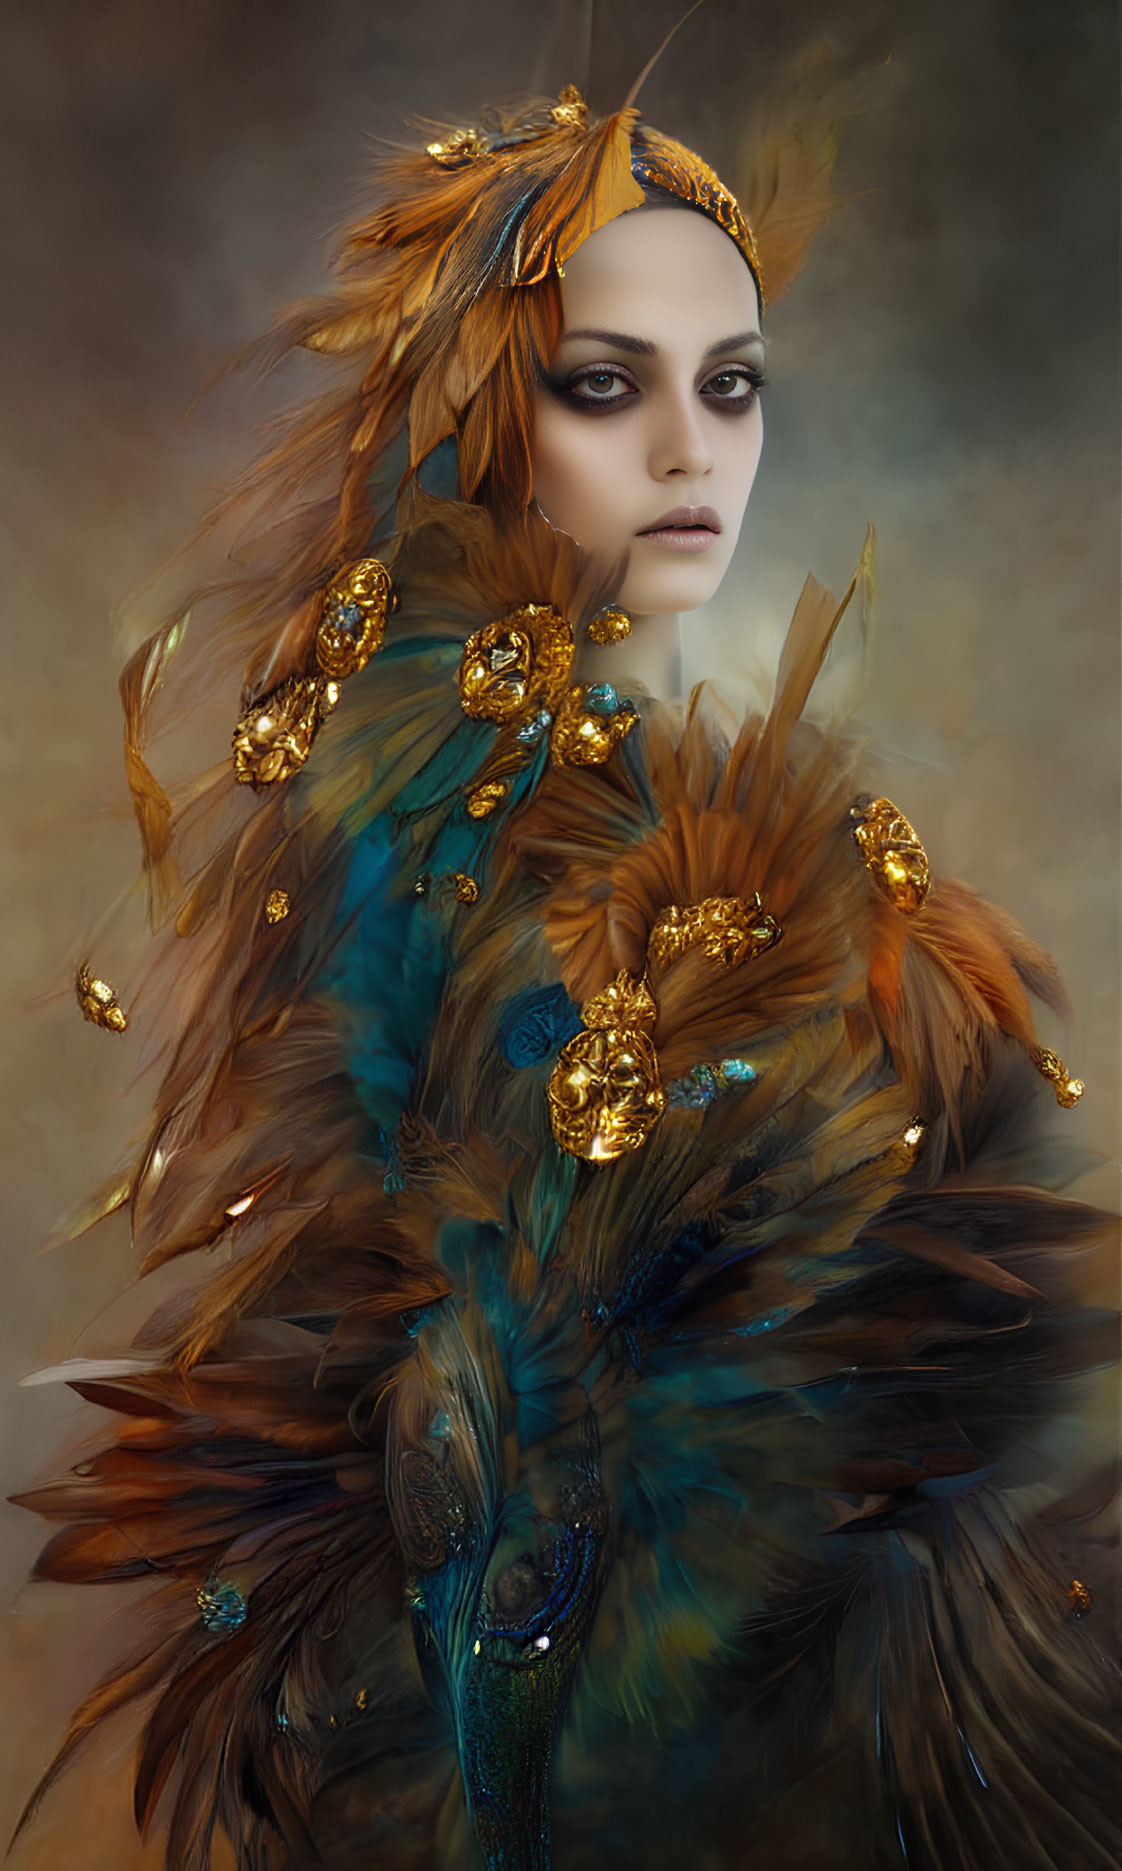 Woman with golden jewelry and peacock feather in ethereal setting